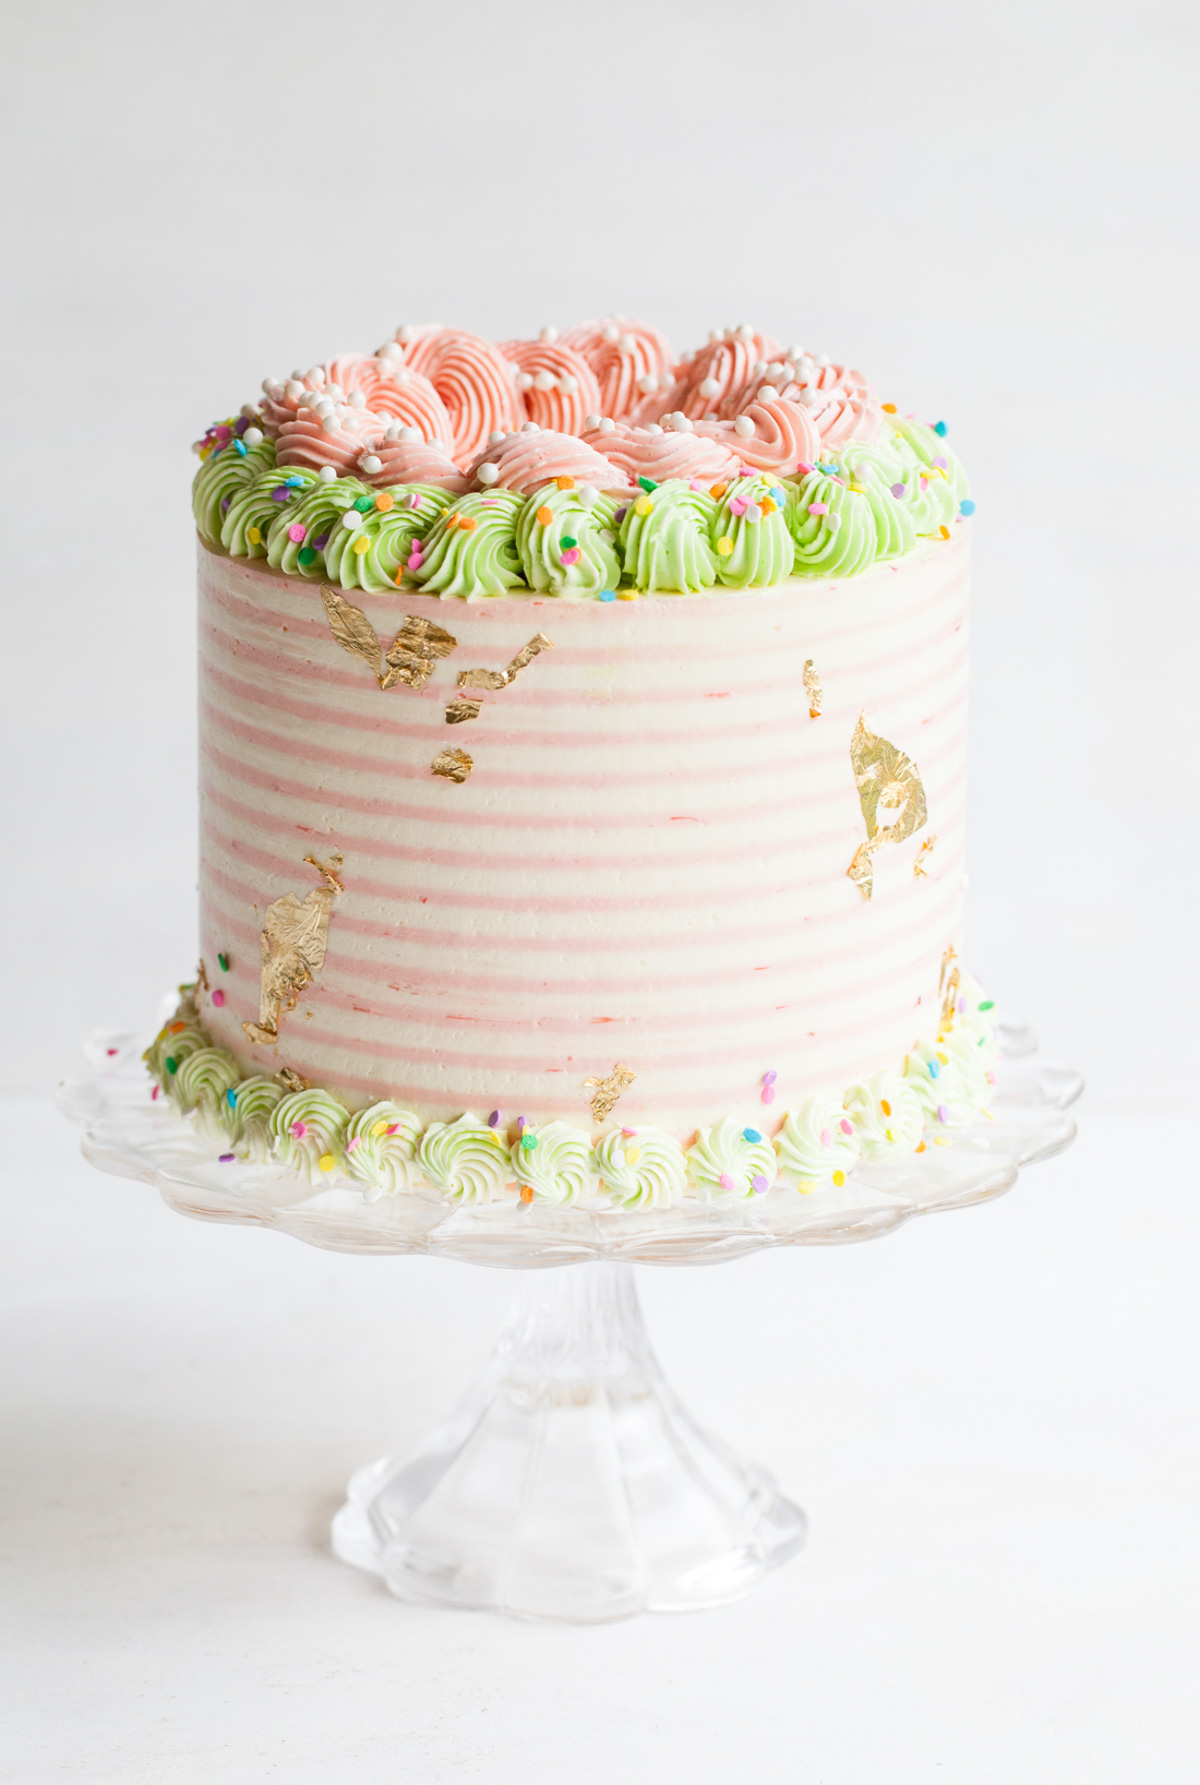 Rhubarb cake with pink and white striped buttercream and pastel piped borders